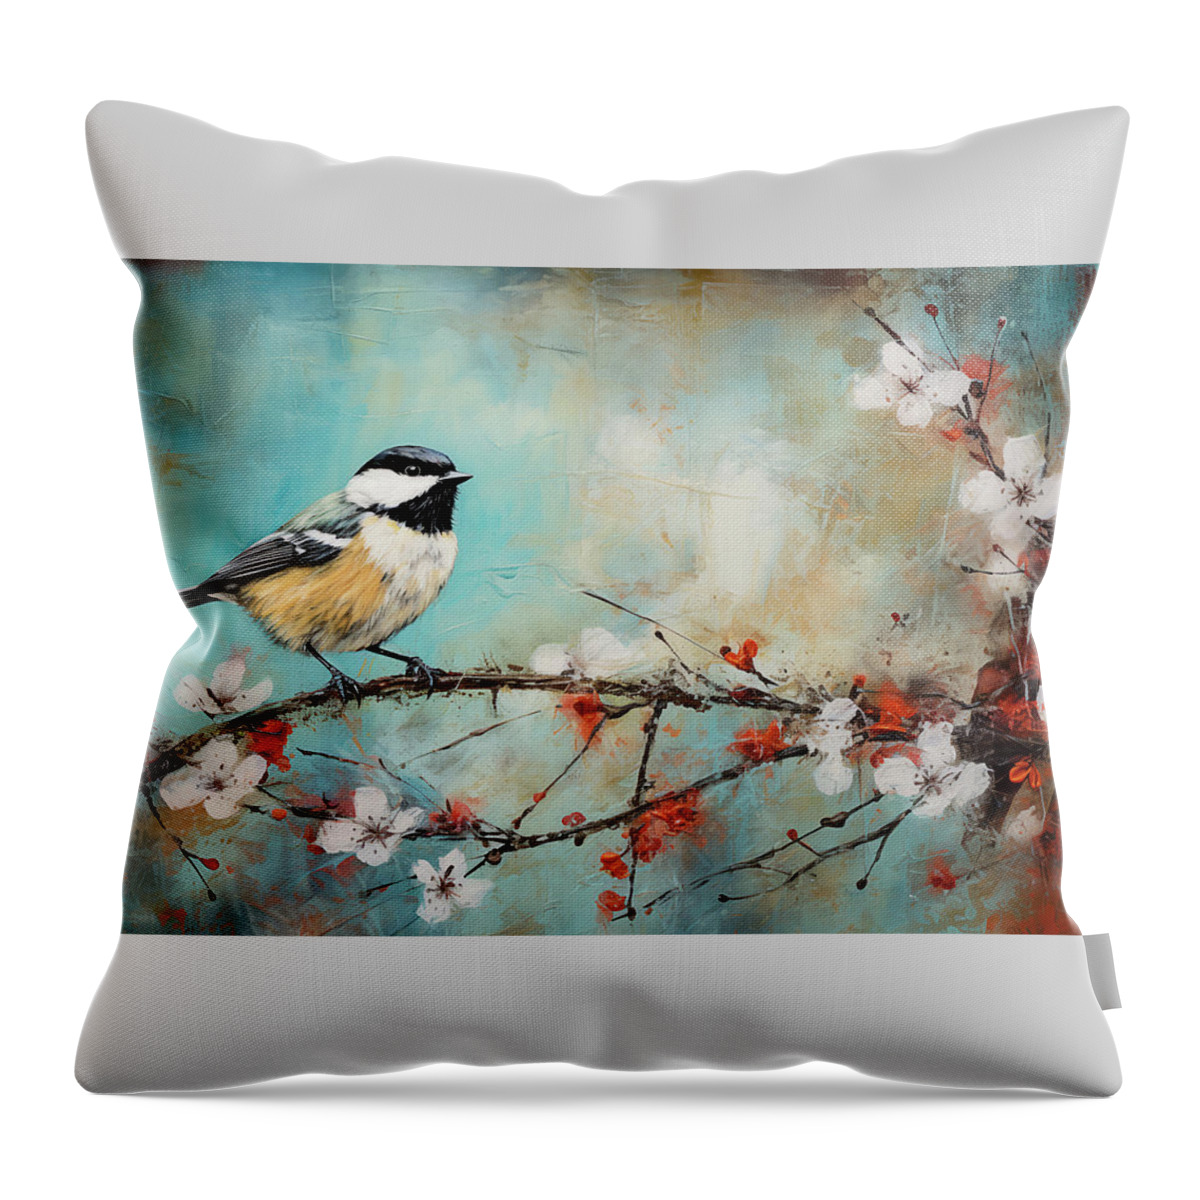 Chickadee Throw Pillow featuring the digital art My Little Chickadee by Peggy Collins